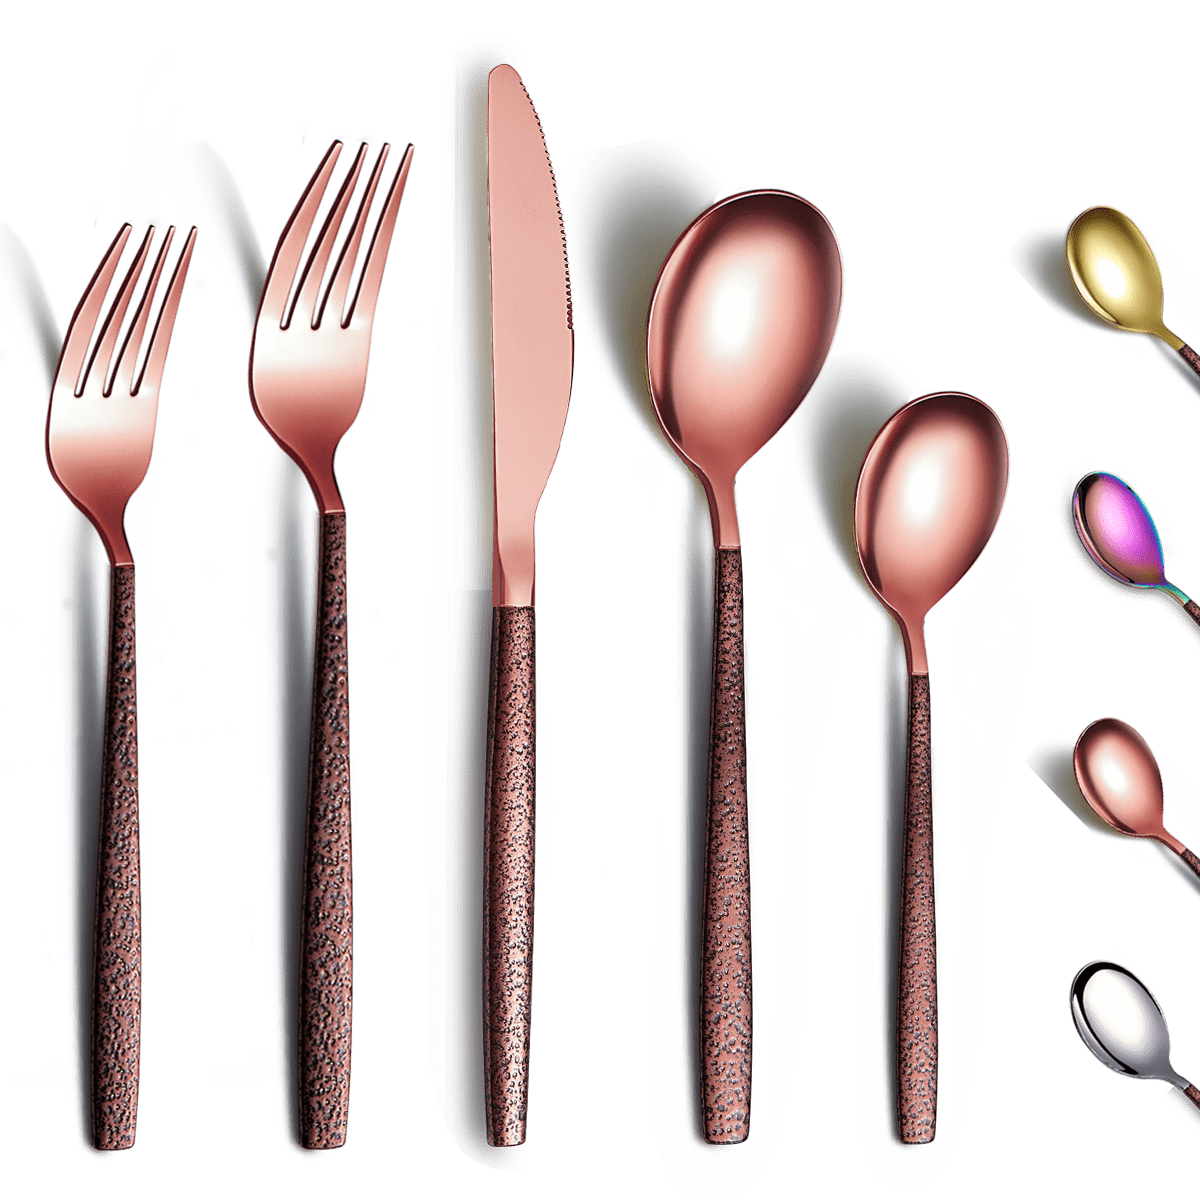 Stapava 48-Piece Copper Silverware Set with Steak Knives for 8, Stainless  Steel Rose Gold Flatware Cutlery Set, Mirror Eating Utensils Tableware with